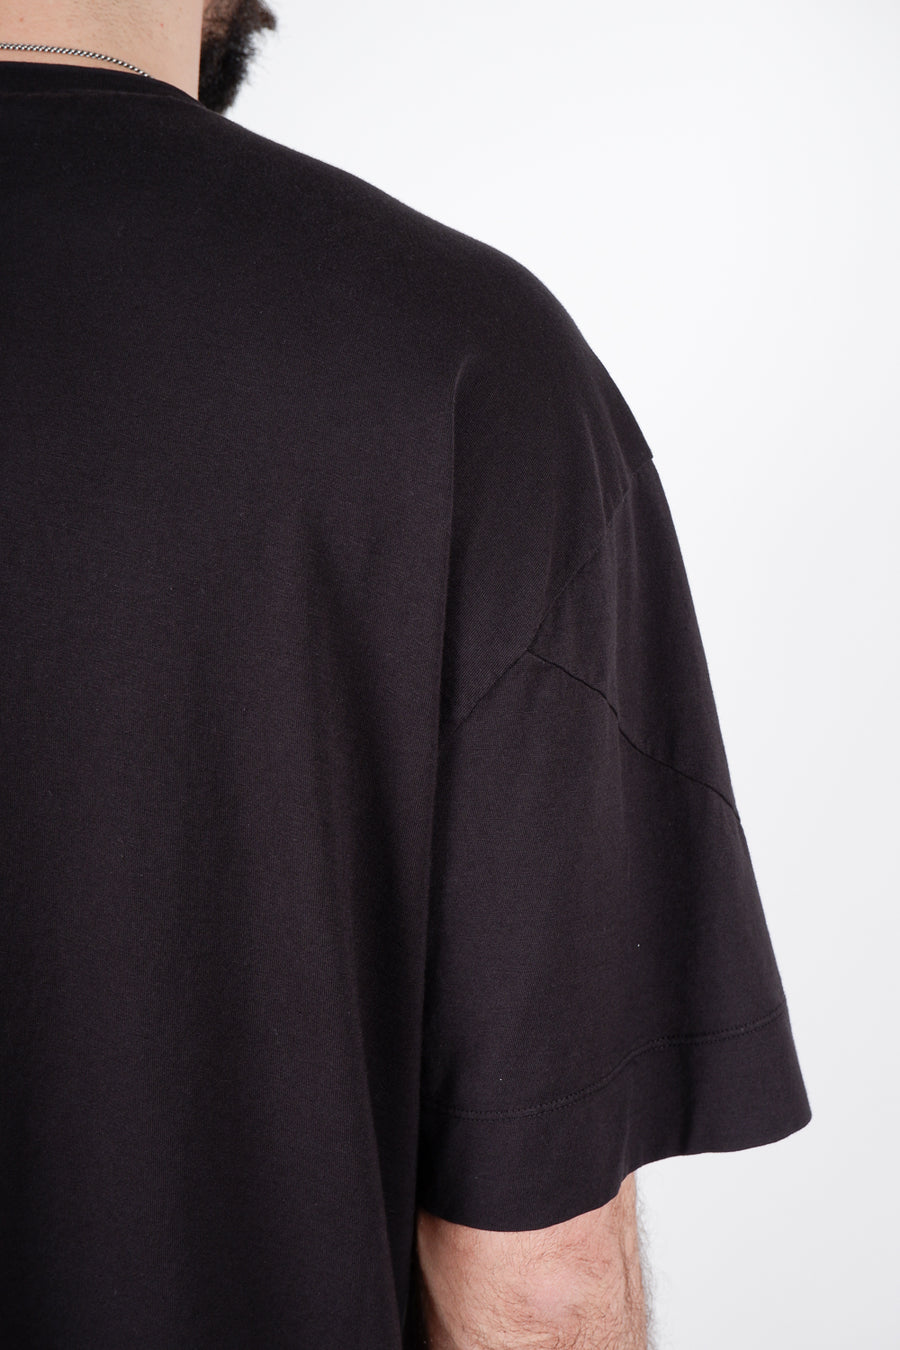 Buy the Transit Front Pocket Detail Oversized T-Shirt in Black at Intro. Spend £50 for free UK delivery. Official stockists. We ship worldwide.